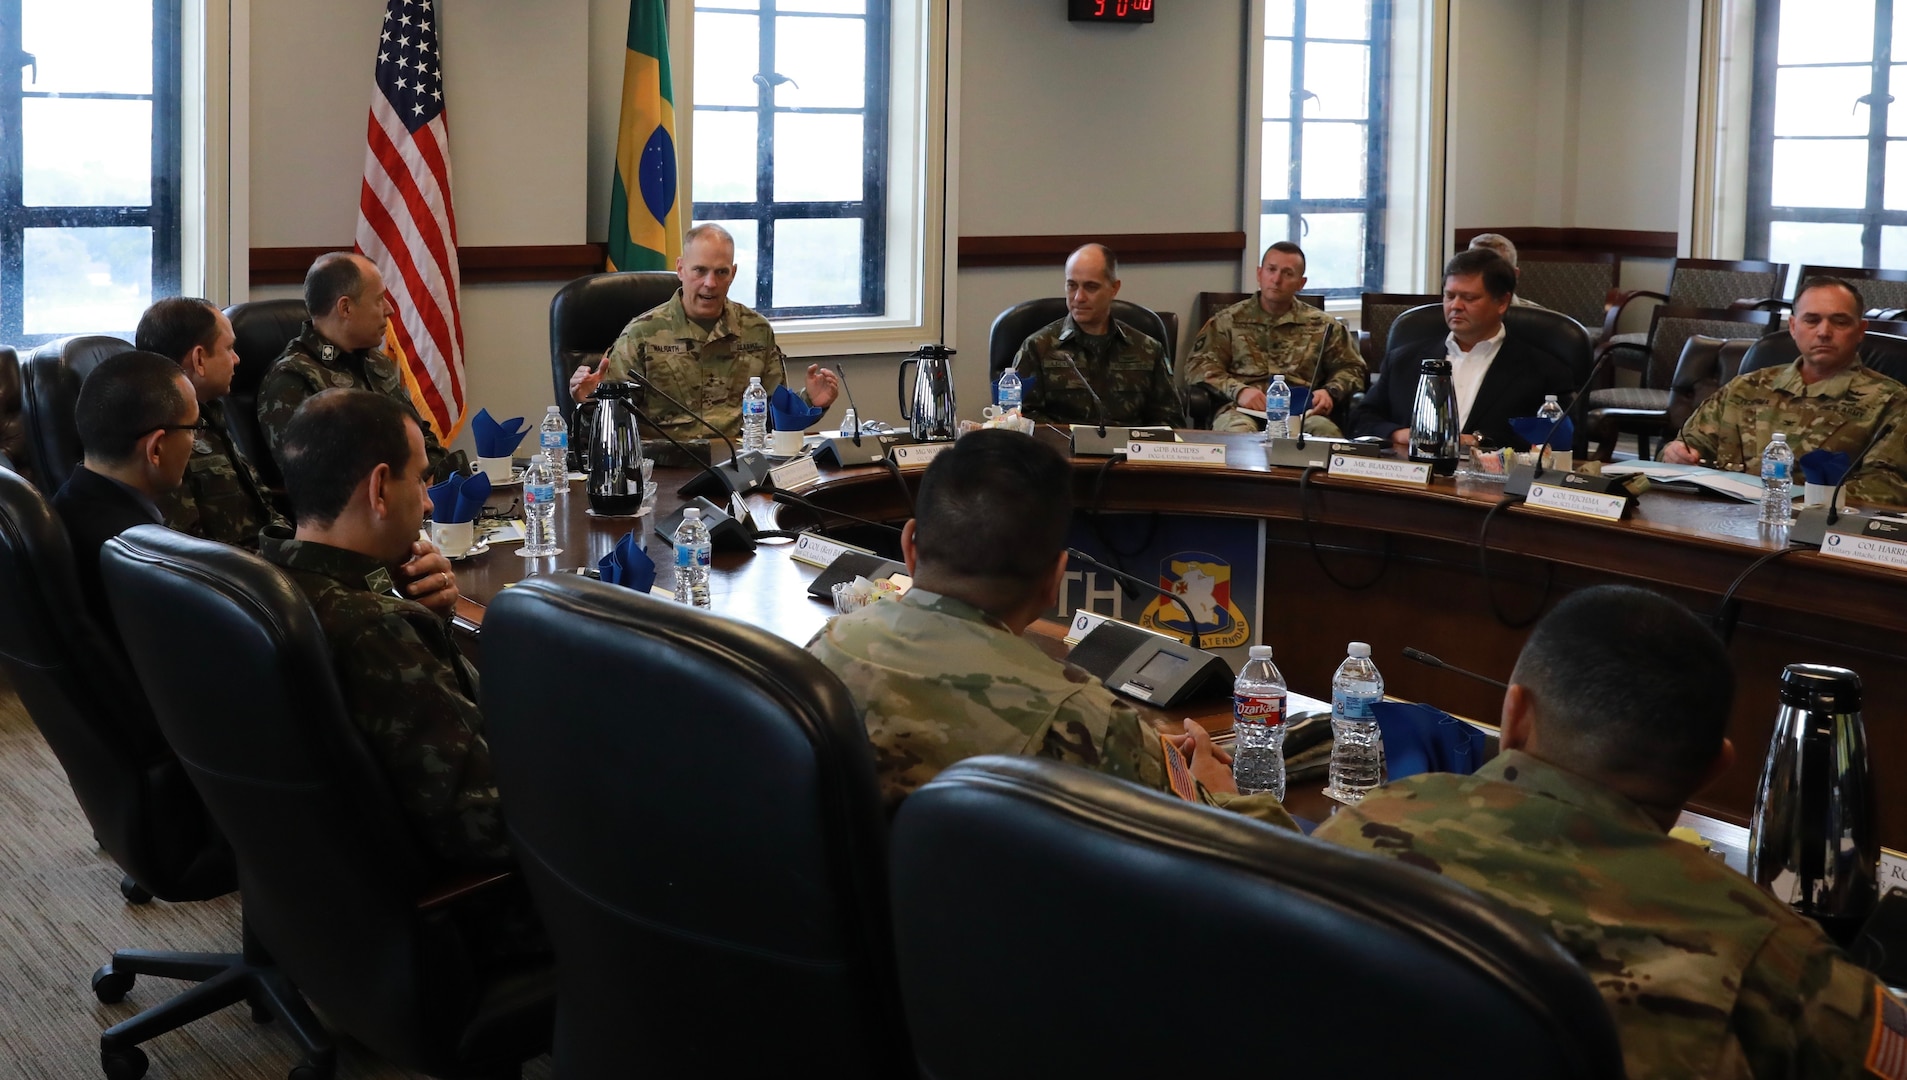 In preparation for this year’s PANAMAX multinational exercise and upcoming combined training, U.S. Army South hosted Brazilian army Maj. Gen. Marcos De Sá Affonso Da Costa, Brazilian director of training, and Maj. Gen. Josias Pedrotti Da Rosa, Brazilian army attaché to the United States, and their delegation at Army South headquarters, Joint Base San Antonio-Fort Sam Houston, Feb. 4. PANAMAX will be held at the Joint Readiness Training Center at Fort Polk, Louisiana, and in Sao Paulo, Brazil.